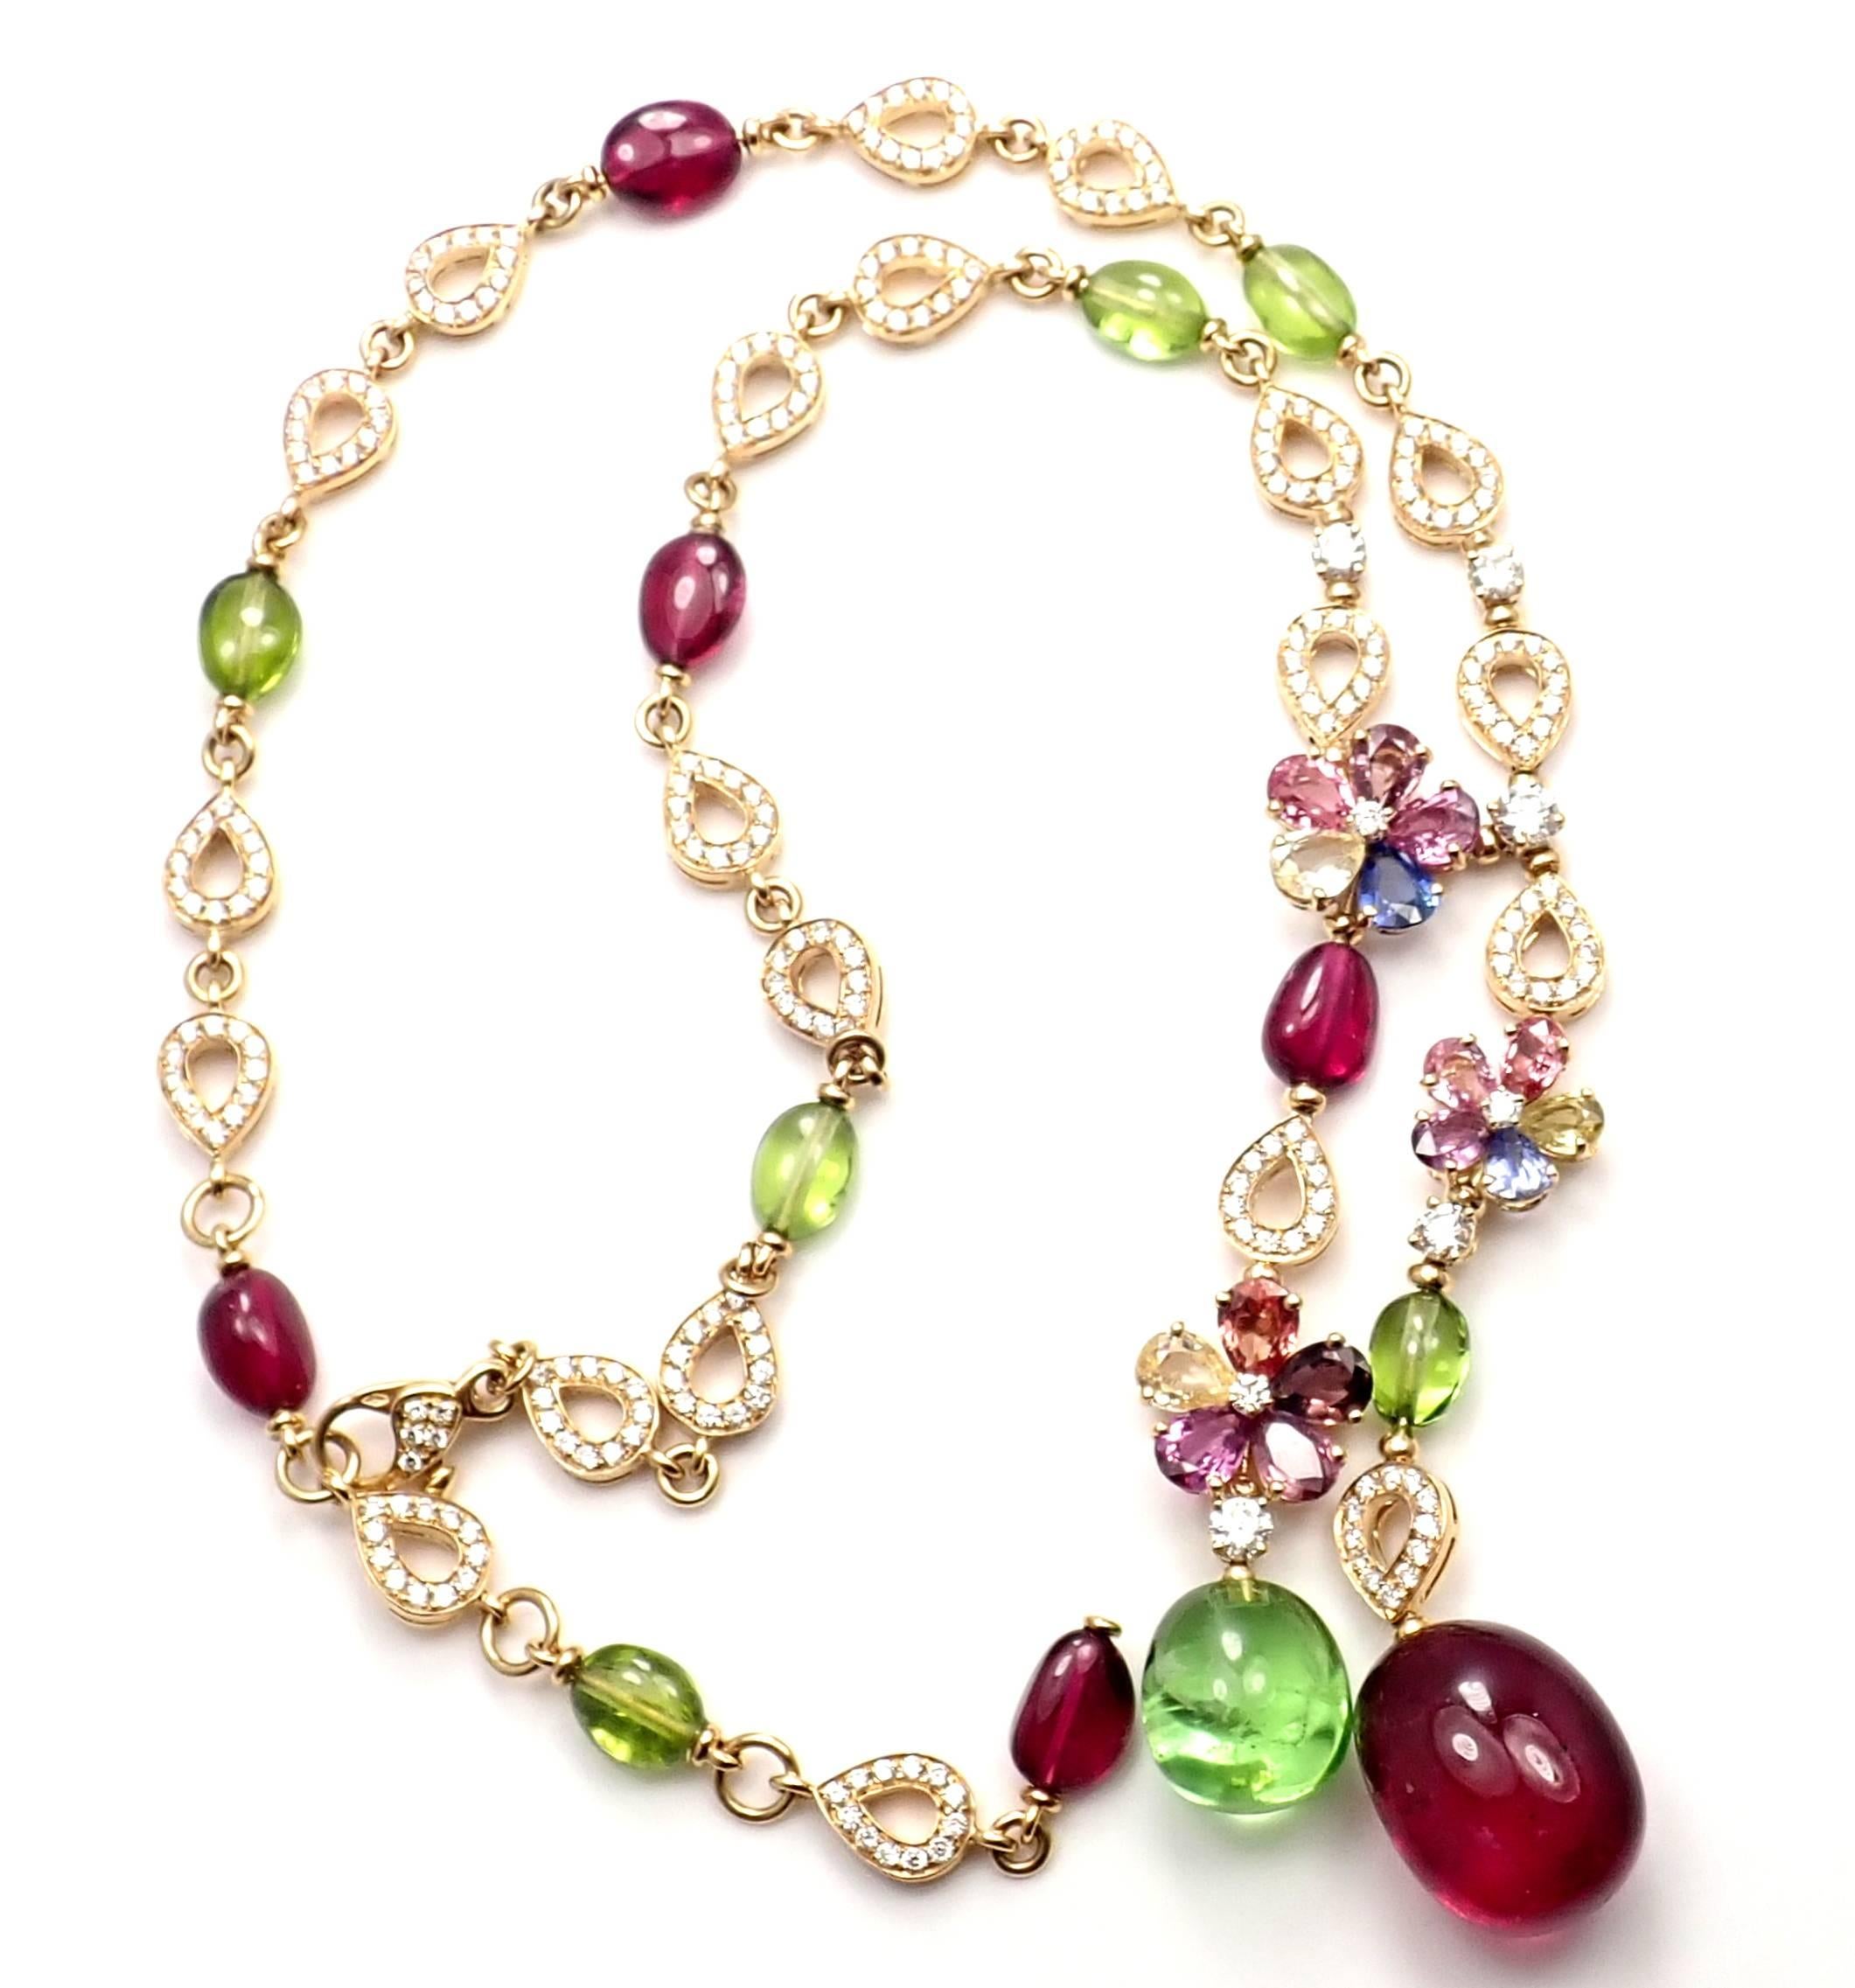 18k Yellow Gold Diamond Multicolor Sapphire Rubellite Peridot Necklace by Bulgari. 
With 281 round brilliant cut diamonds, peridots, rubellites, fancy color sapphires.
Retail Price: $77,000 plus tax.
Details:
Length 16